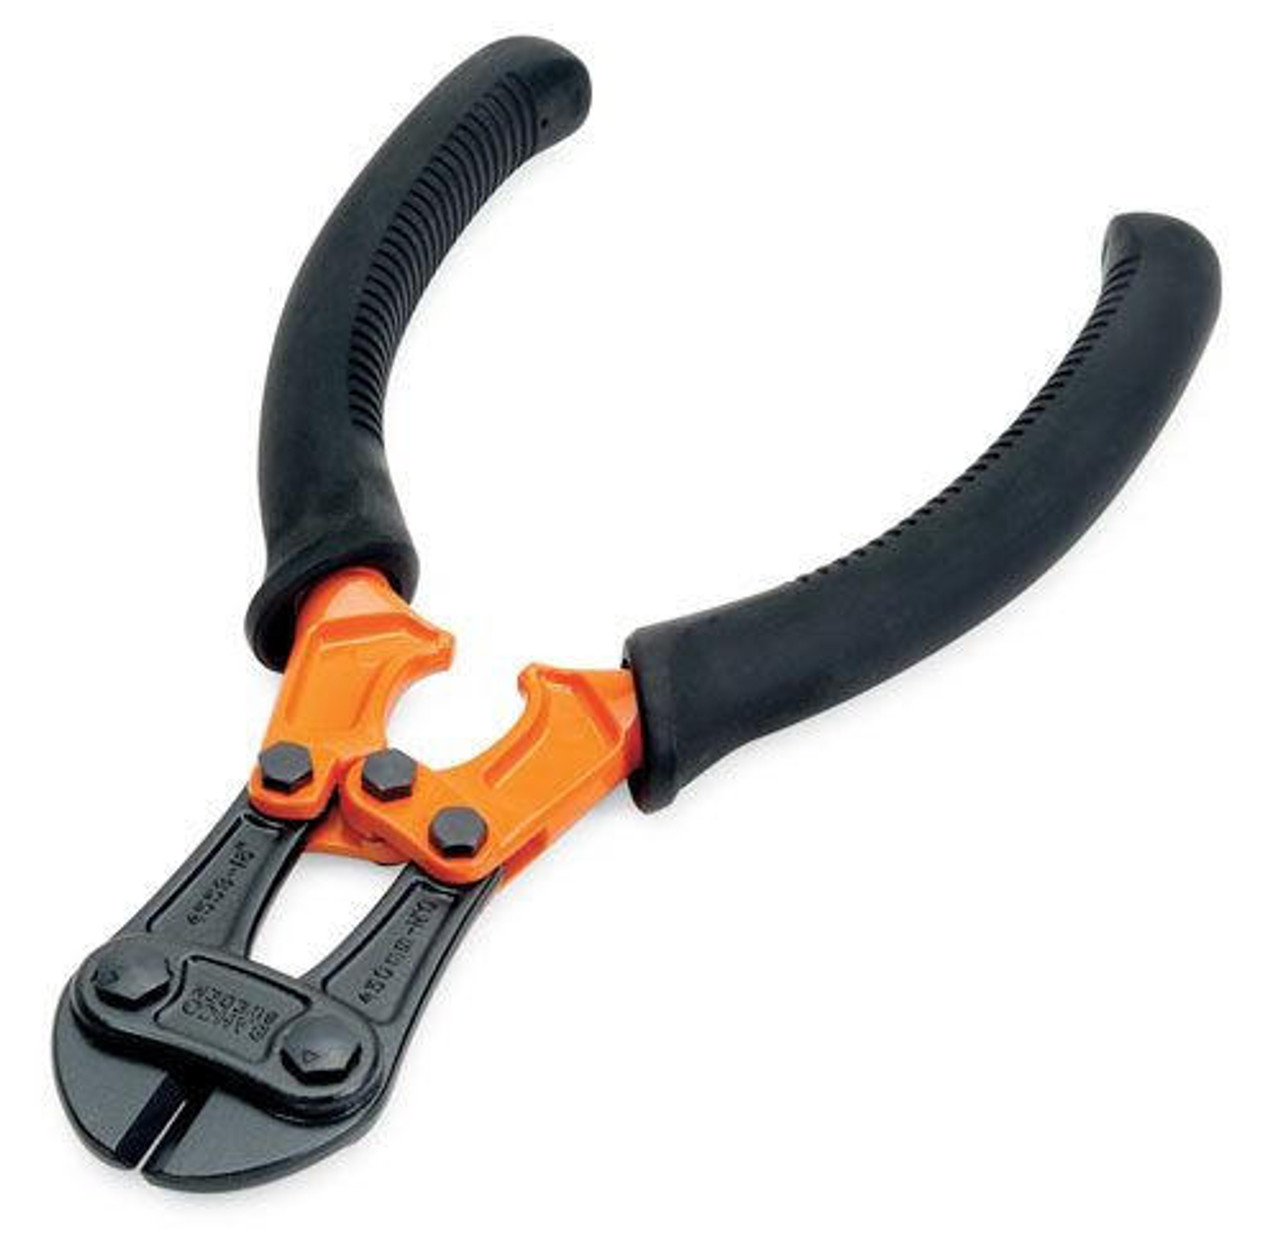 Bahco 18" Bahco Comfort Grip Bolt Cutter - 4559-18 